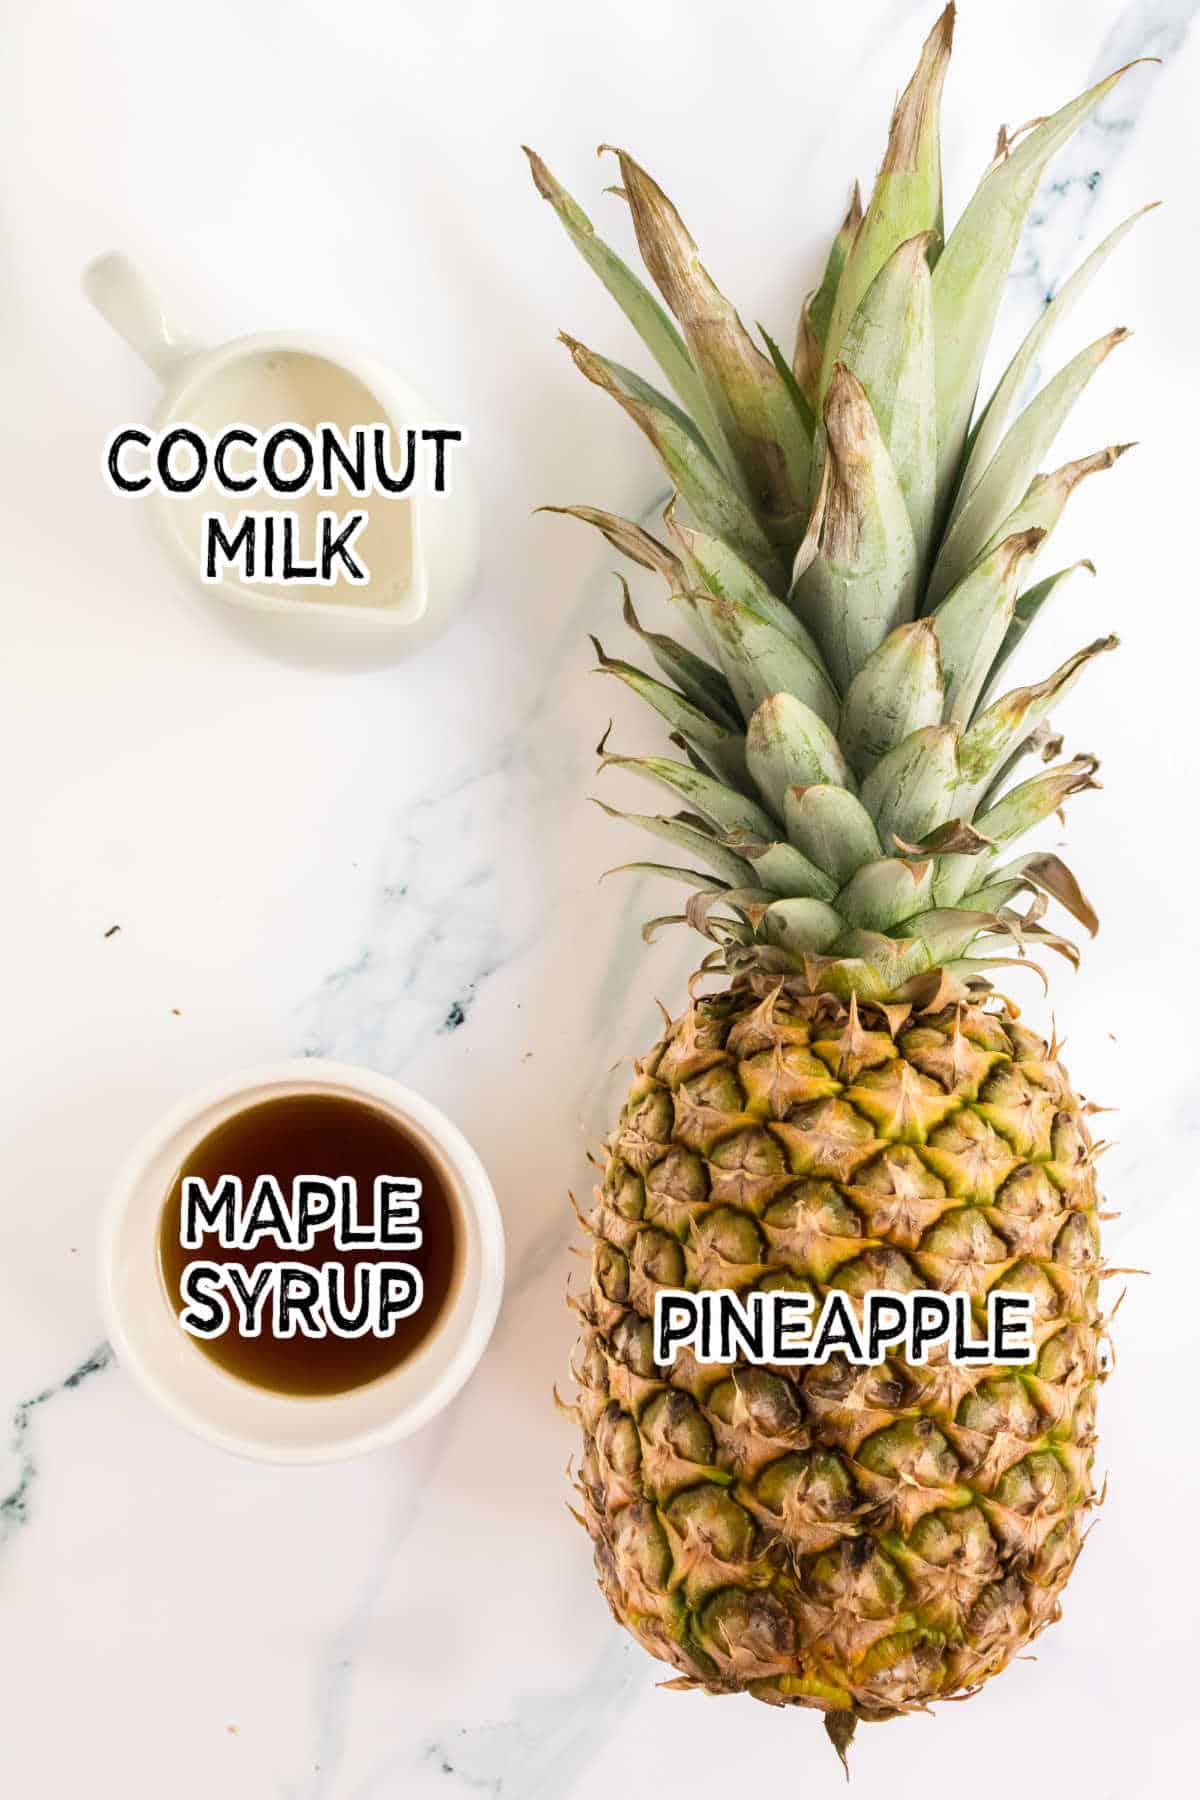 Ingredients to make pineapple ice cream.